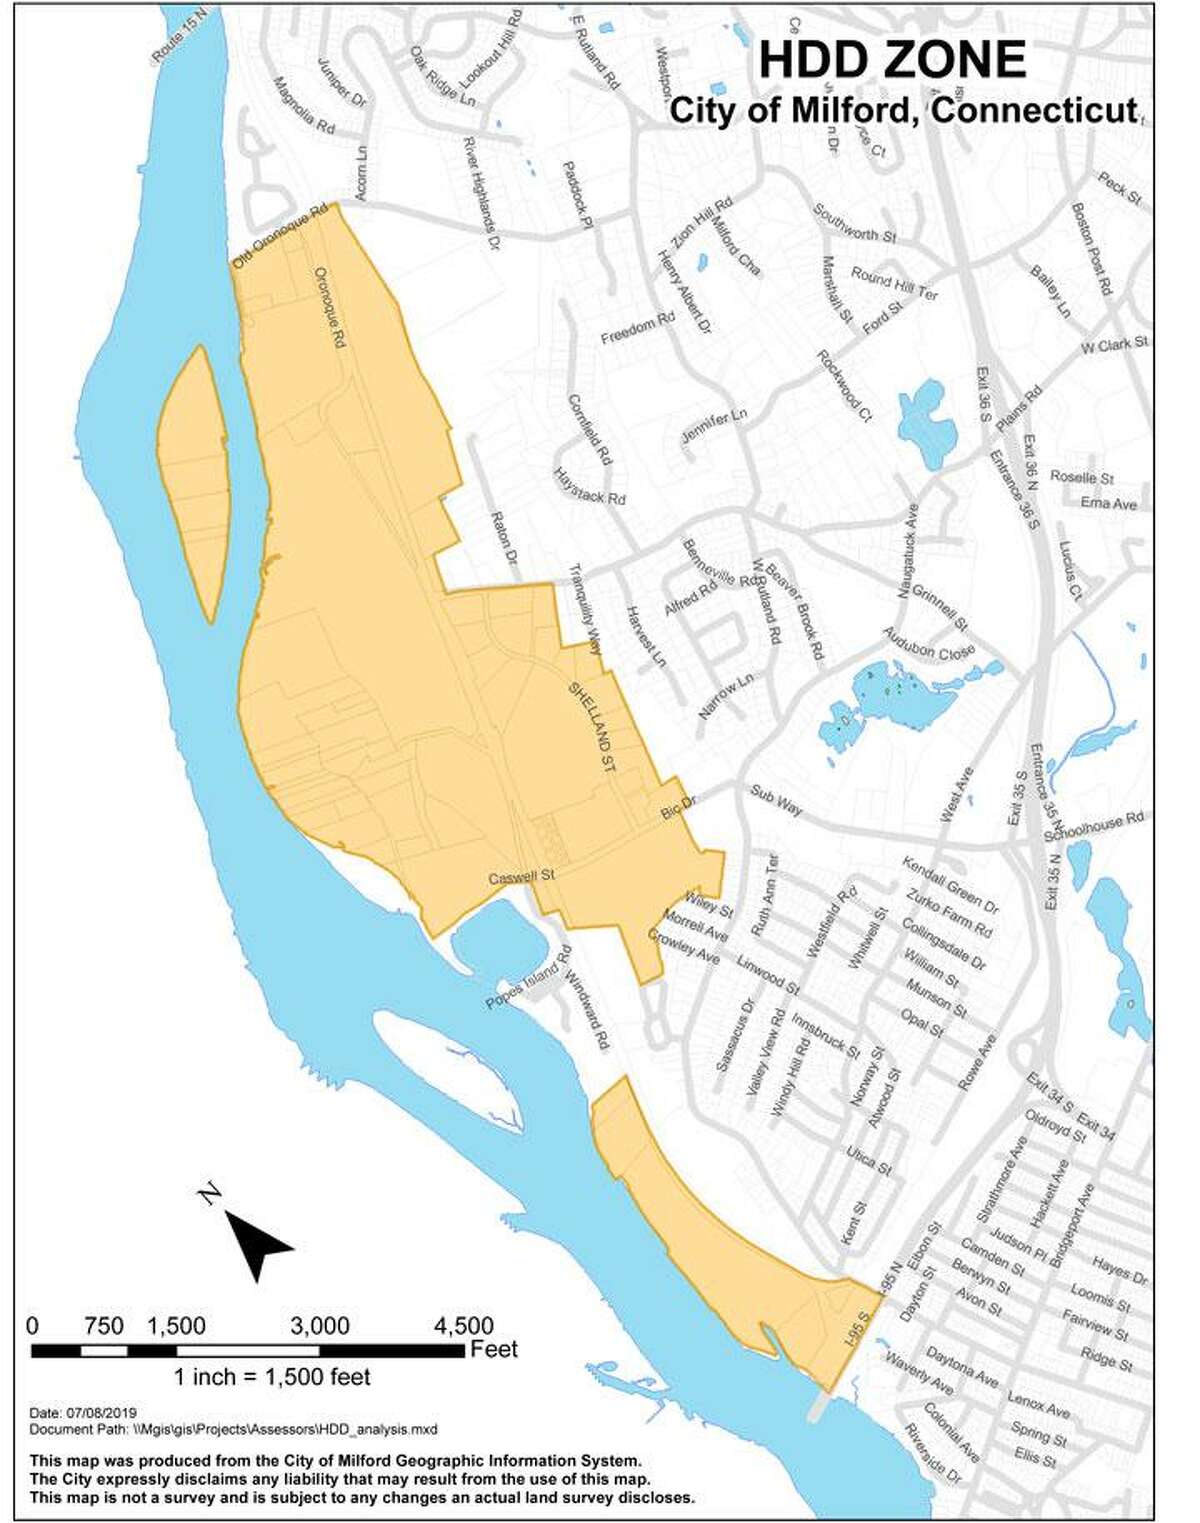 New city regulations are expected to limit self-storage facilities to the Housatonic Design District (HDD) which runs along the Housatonic River. The HDD is shaded in yellow on this map.